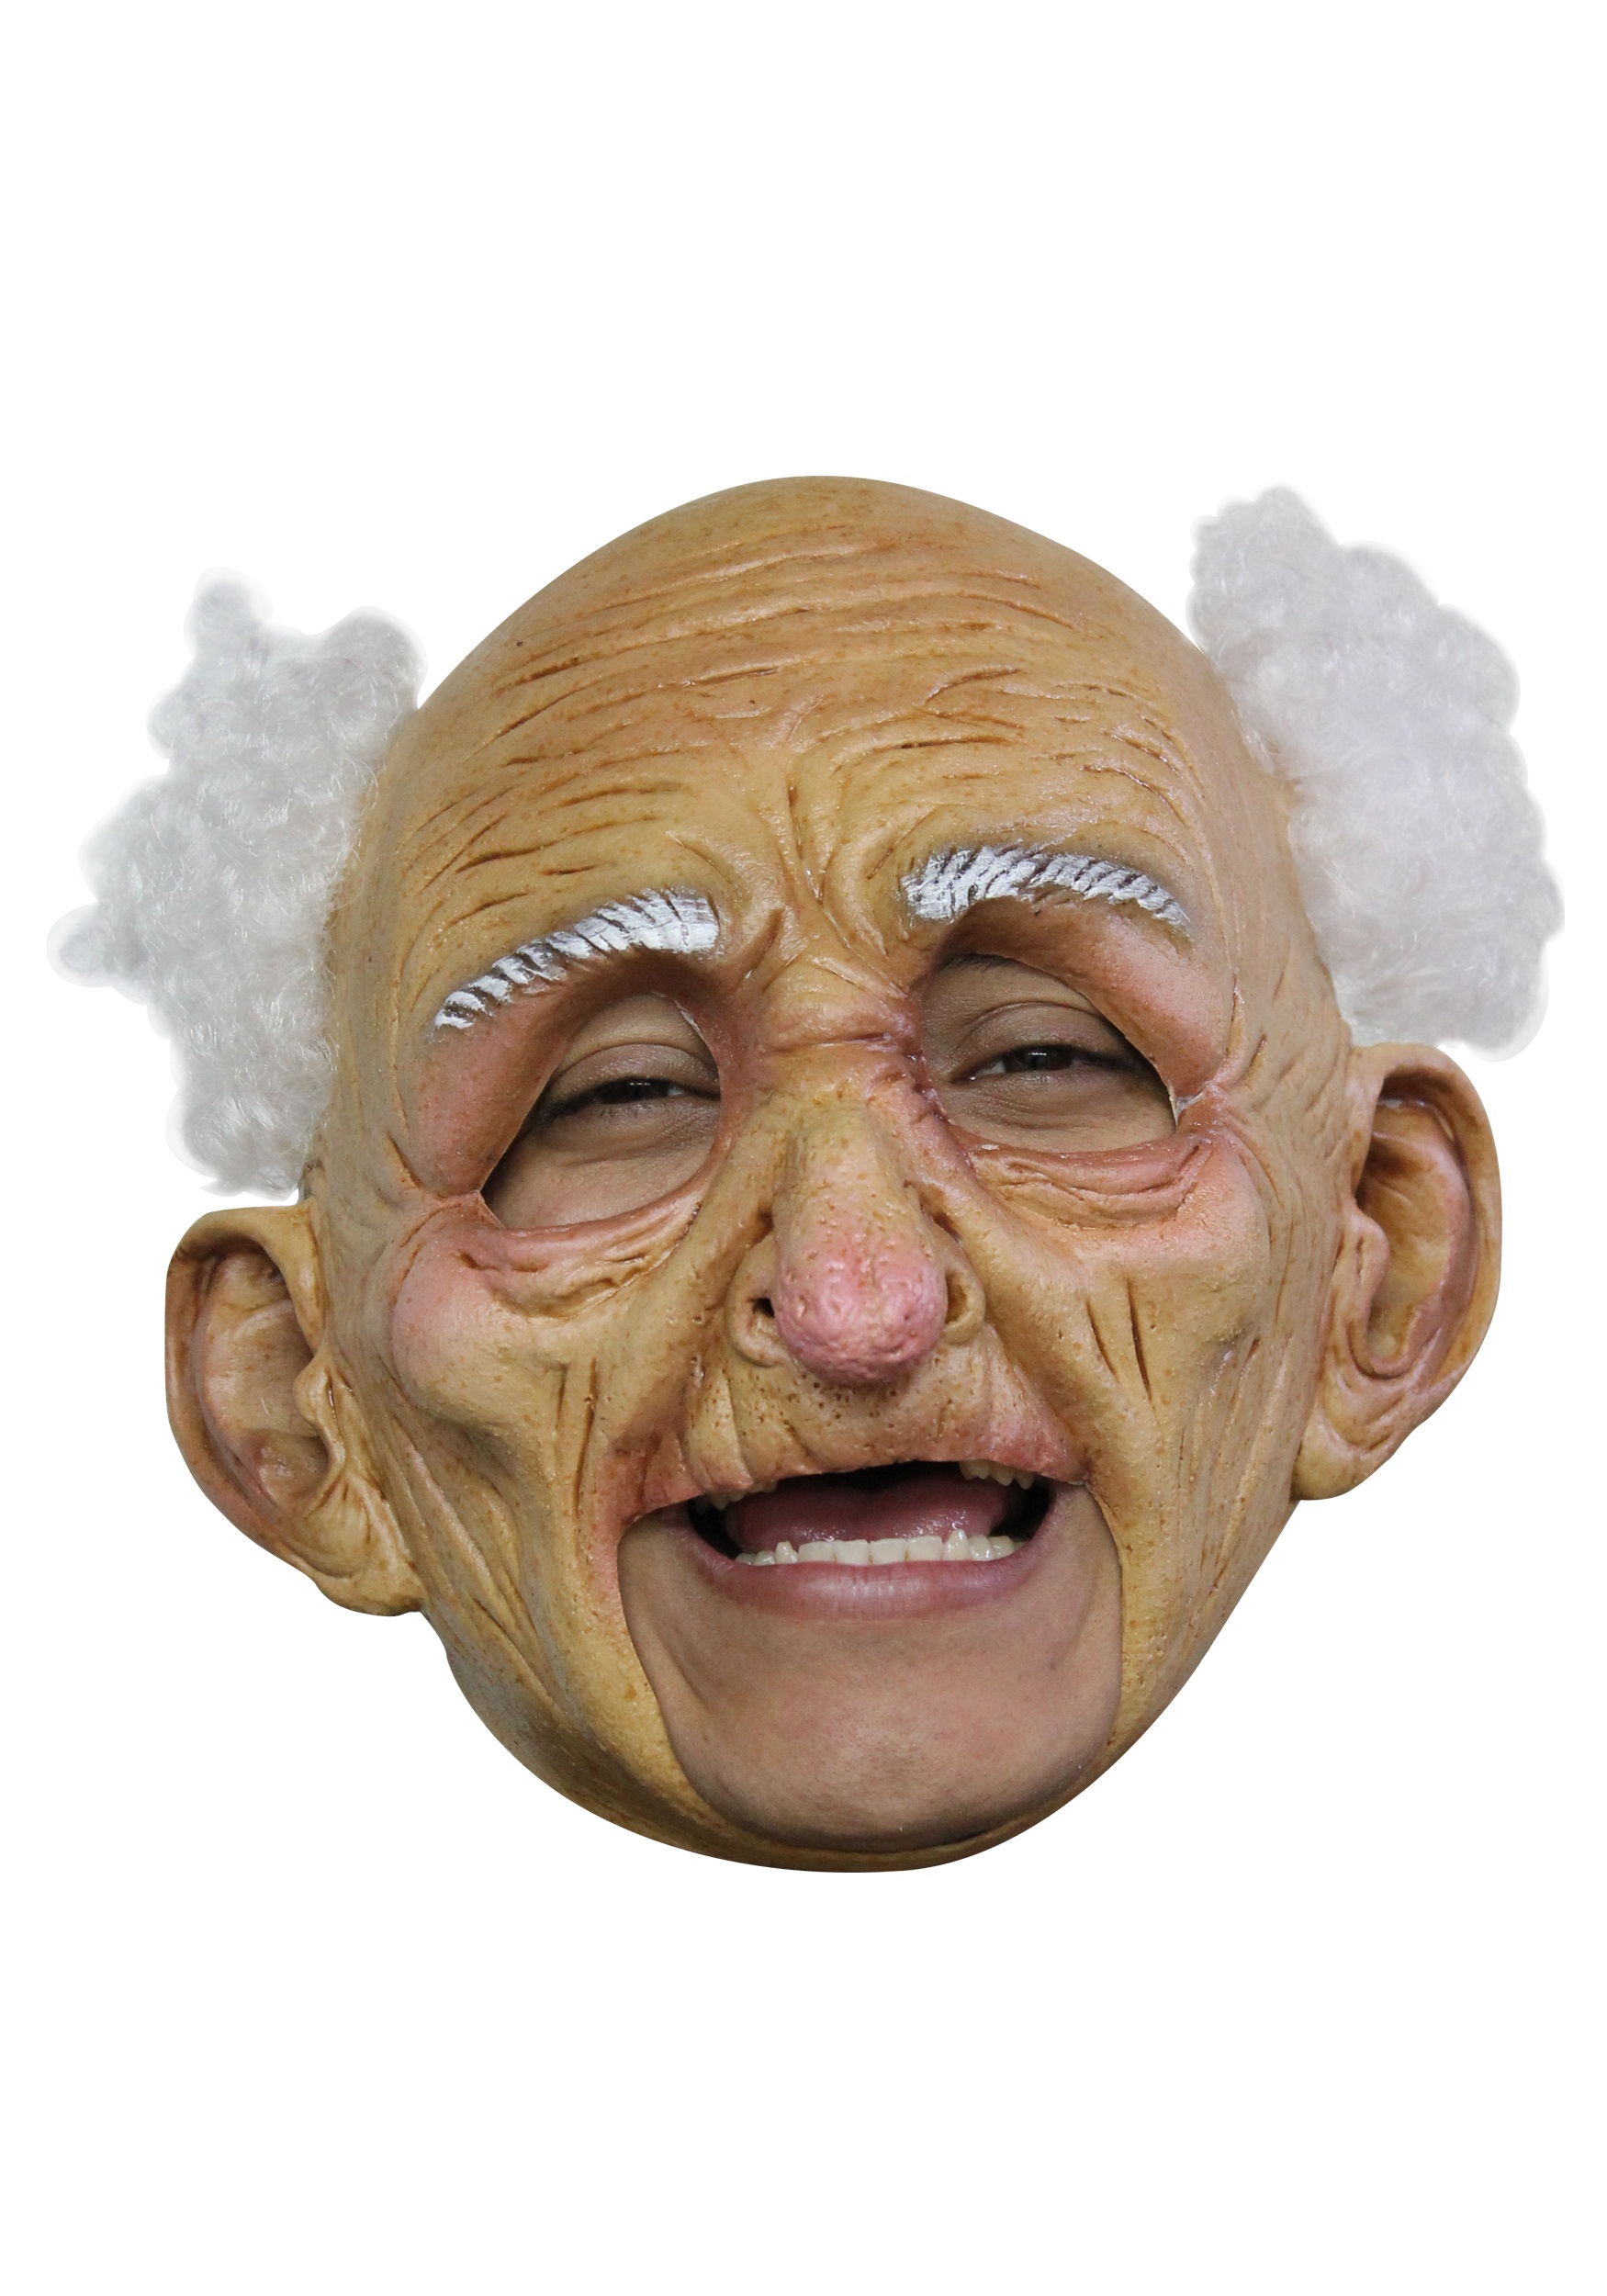 Old Man Deluxe Mask